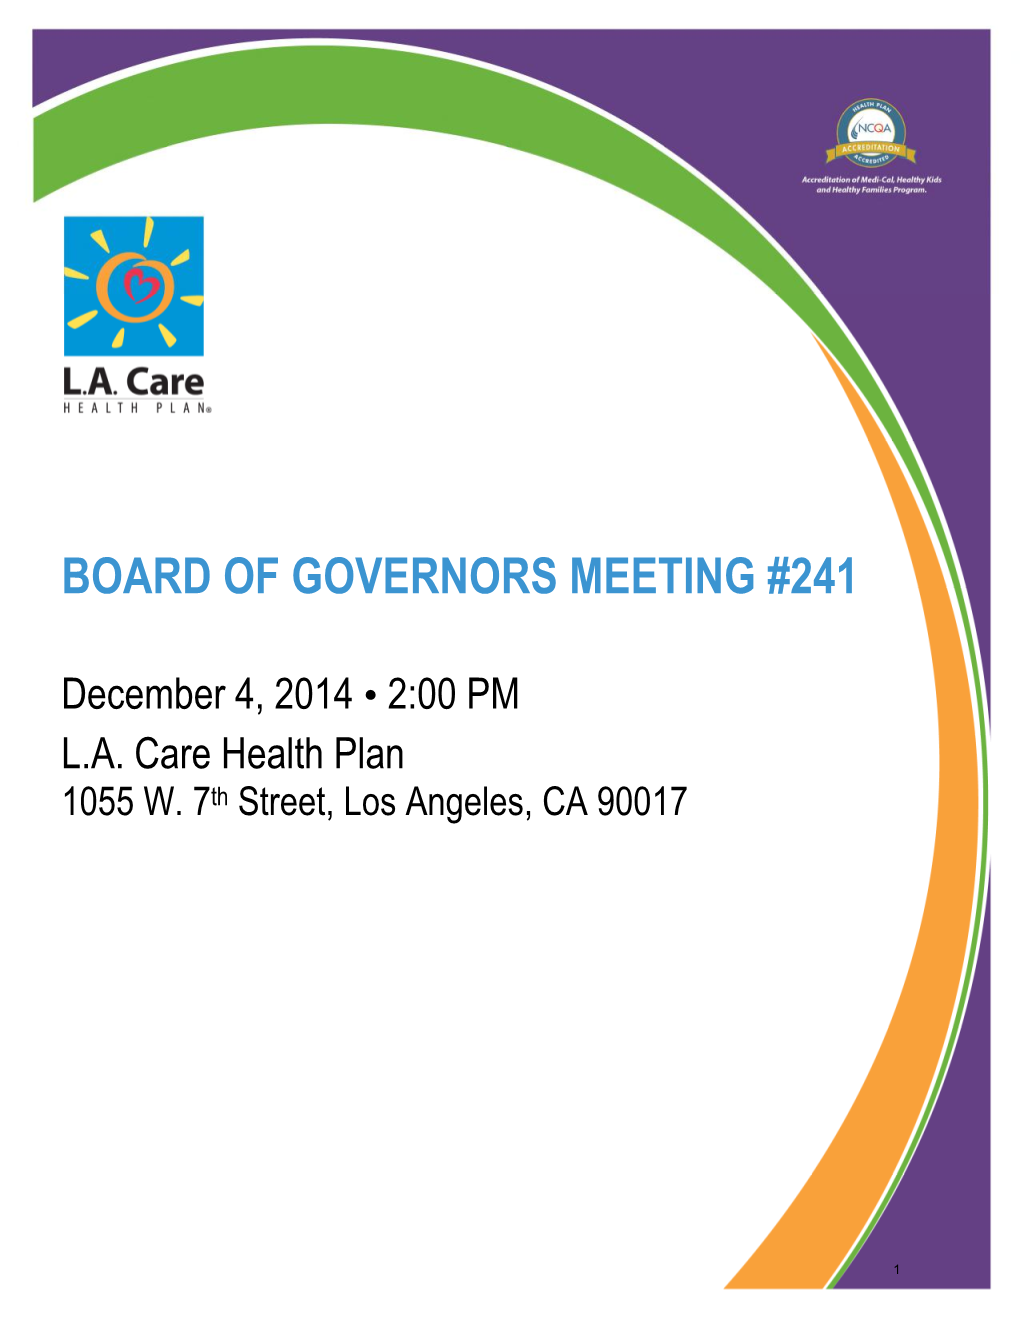 Board of Governors Meeting #241